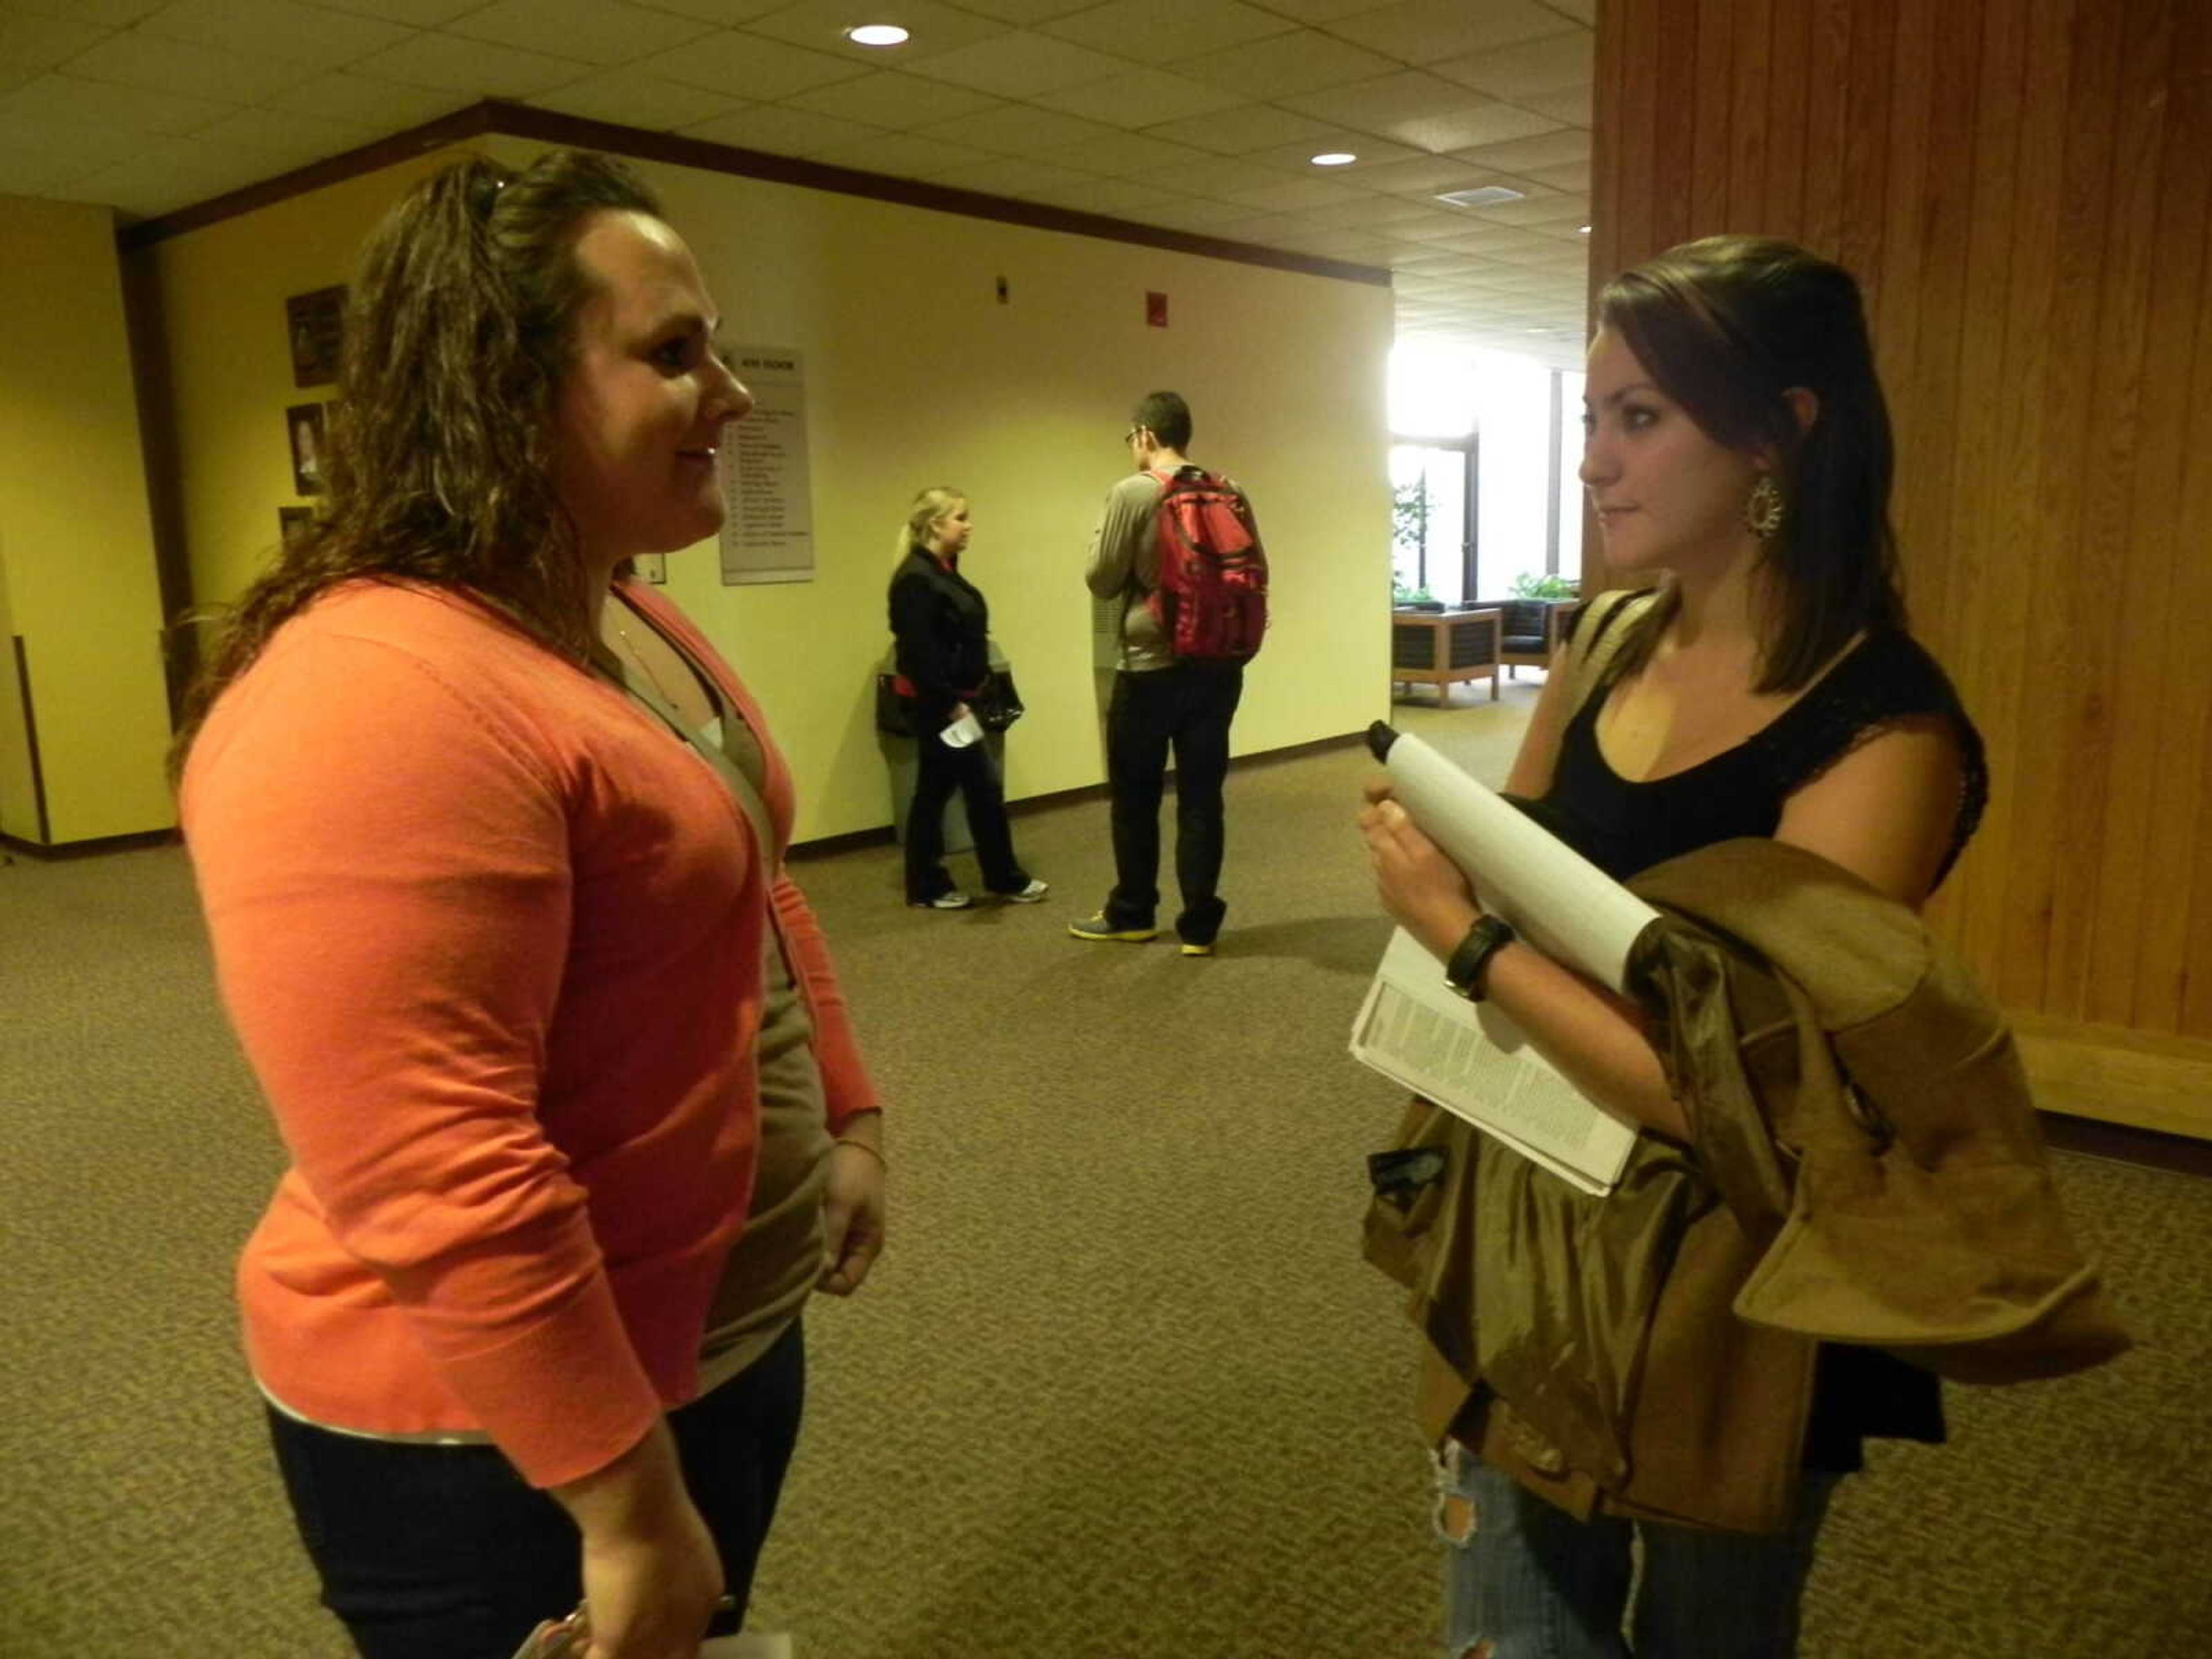 Logann Driskell, left, a resident assistant in Dearmont Hall, speaks with Arts and Entertainment editor Whitney Law, right. Photo by Kelsey Barksdale.